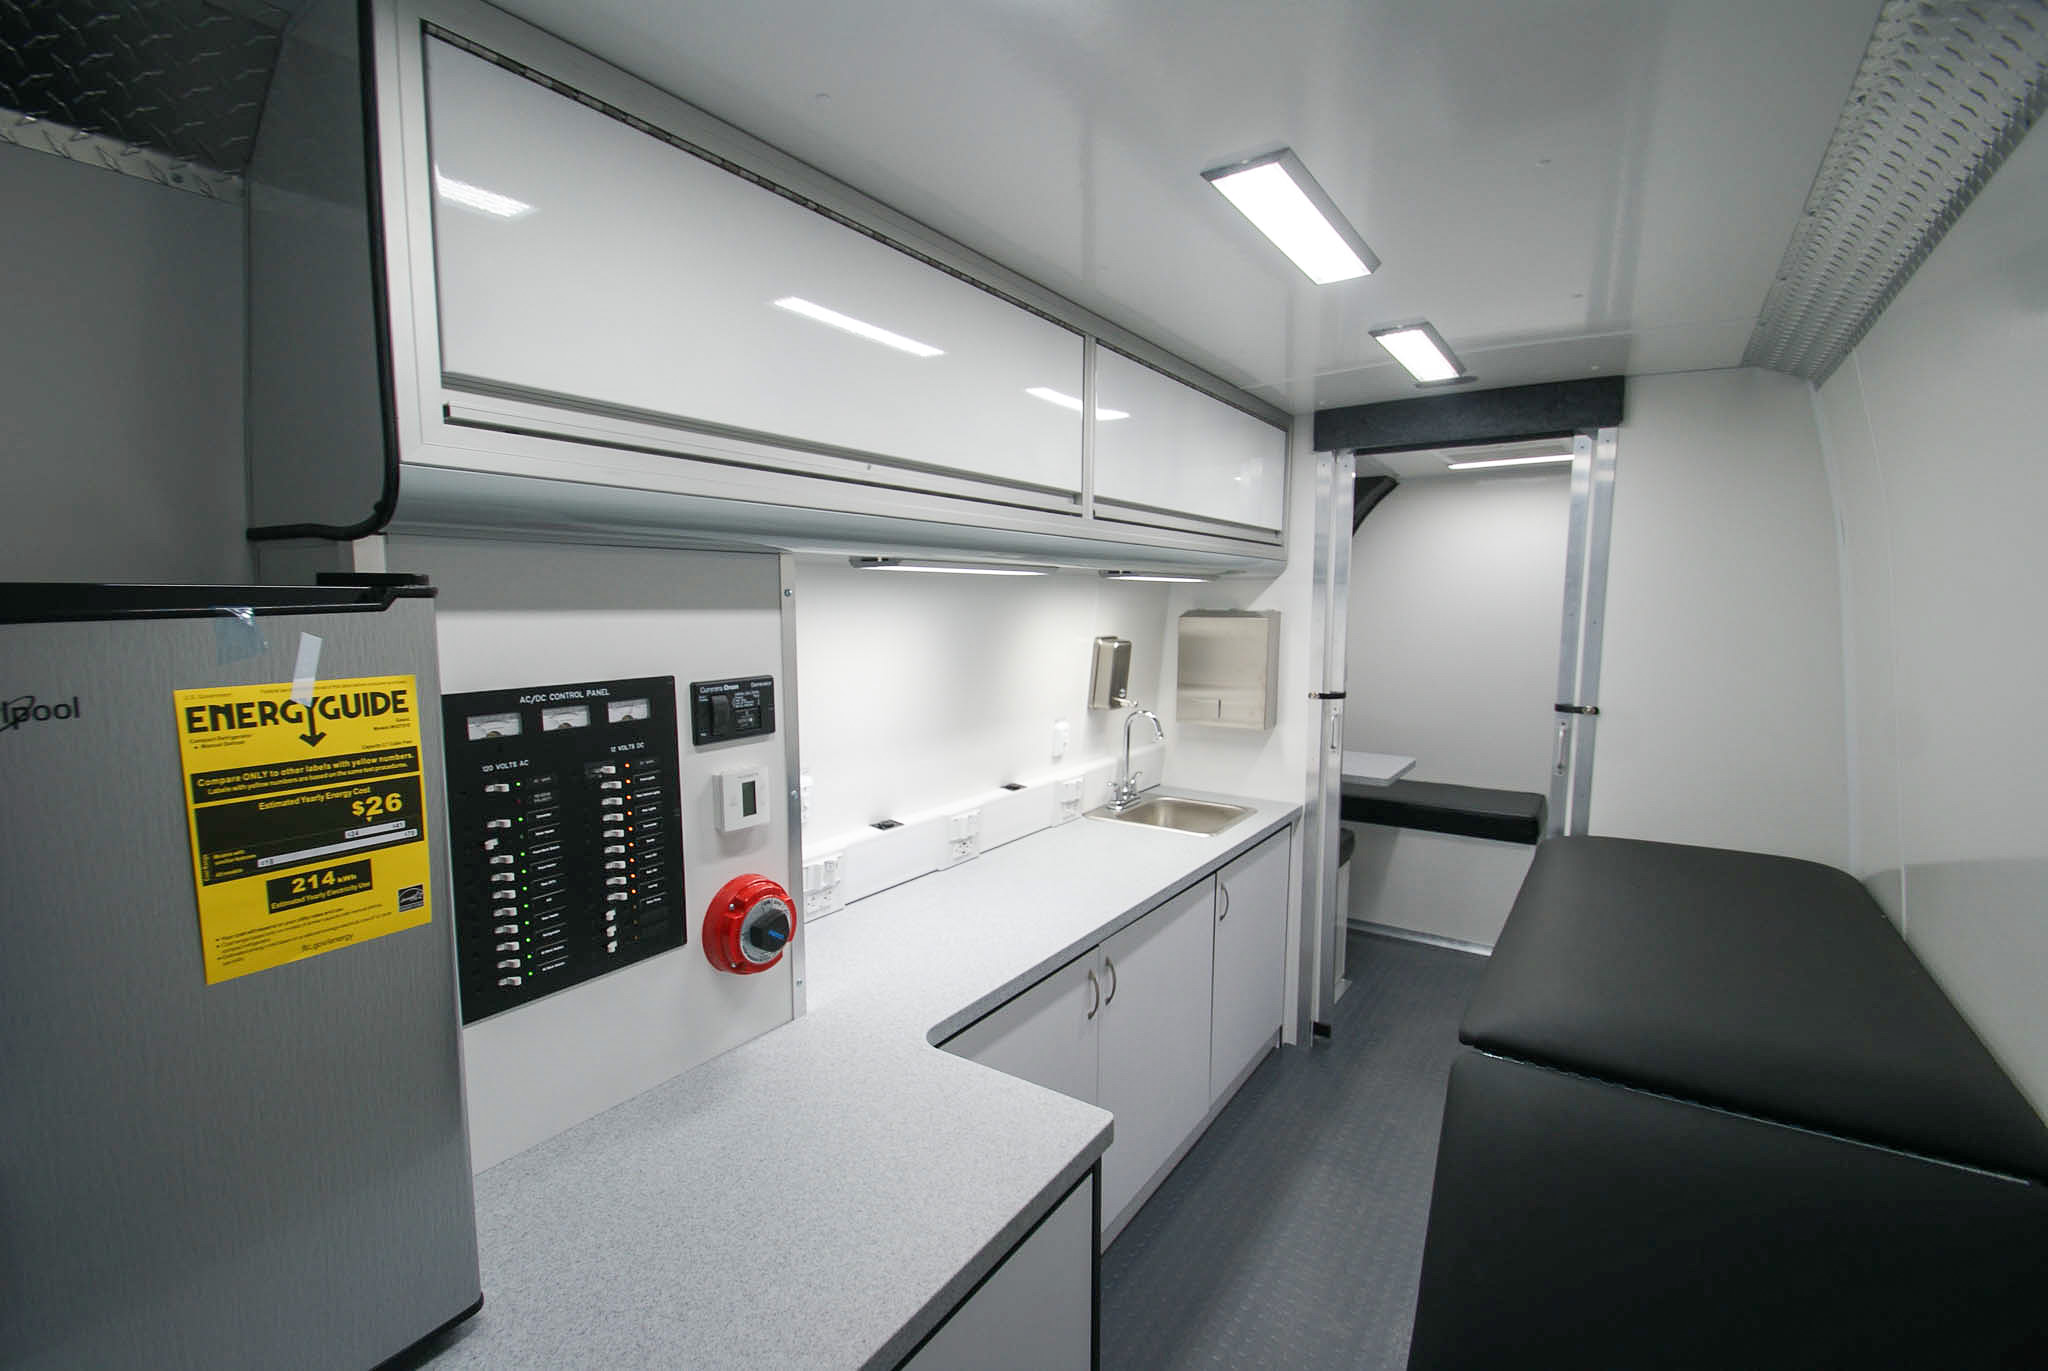 An angled view of the Mobile Medical Exam sprinter's back room as viewed from the rear entrance. You can see the refrigerator, electric control panel, countertops with a sink, overhead cabinets, and the exam bench. Past the open doors, you can see the waiting area.